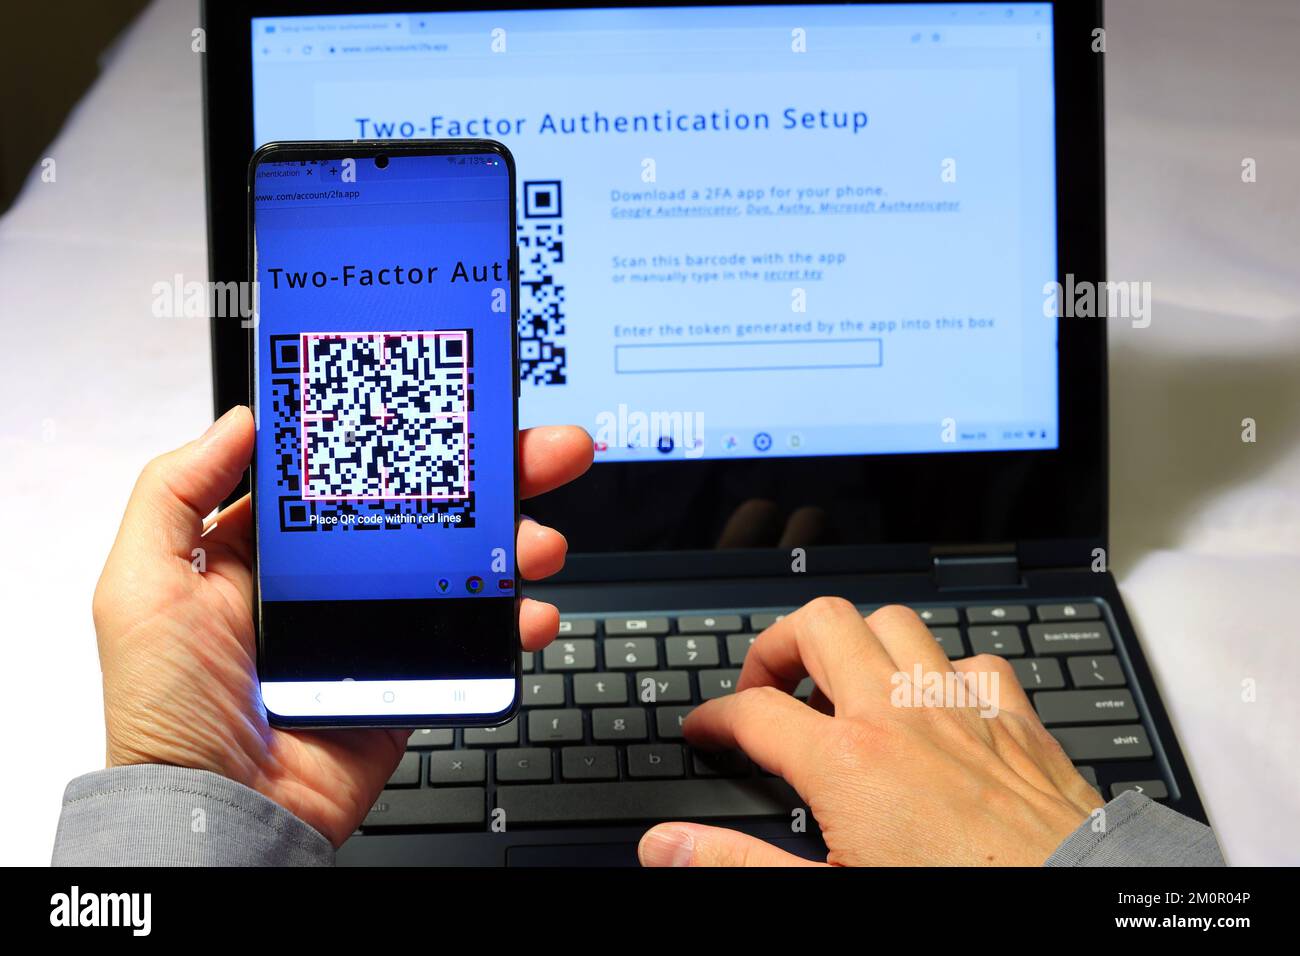 A person scans a QR code with the Google Authenticator app on their smartphone to setup two-factor authentication 2FA for secure logins Stock Photo